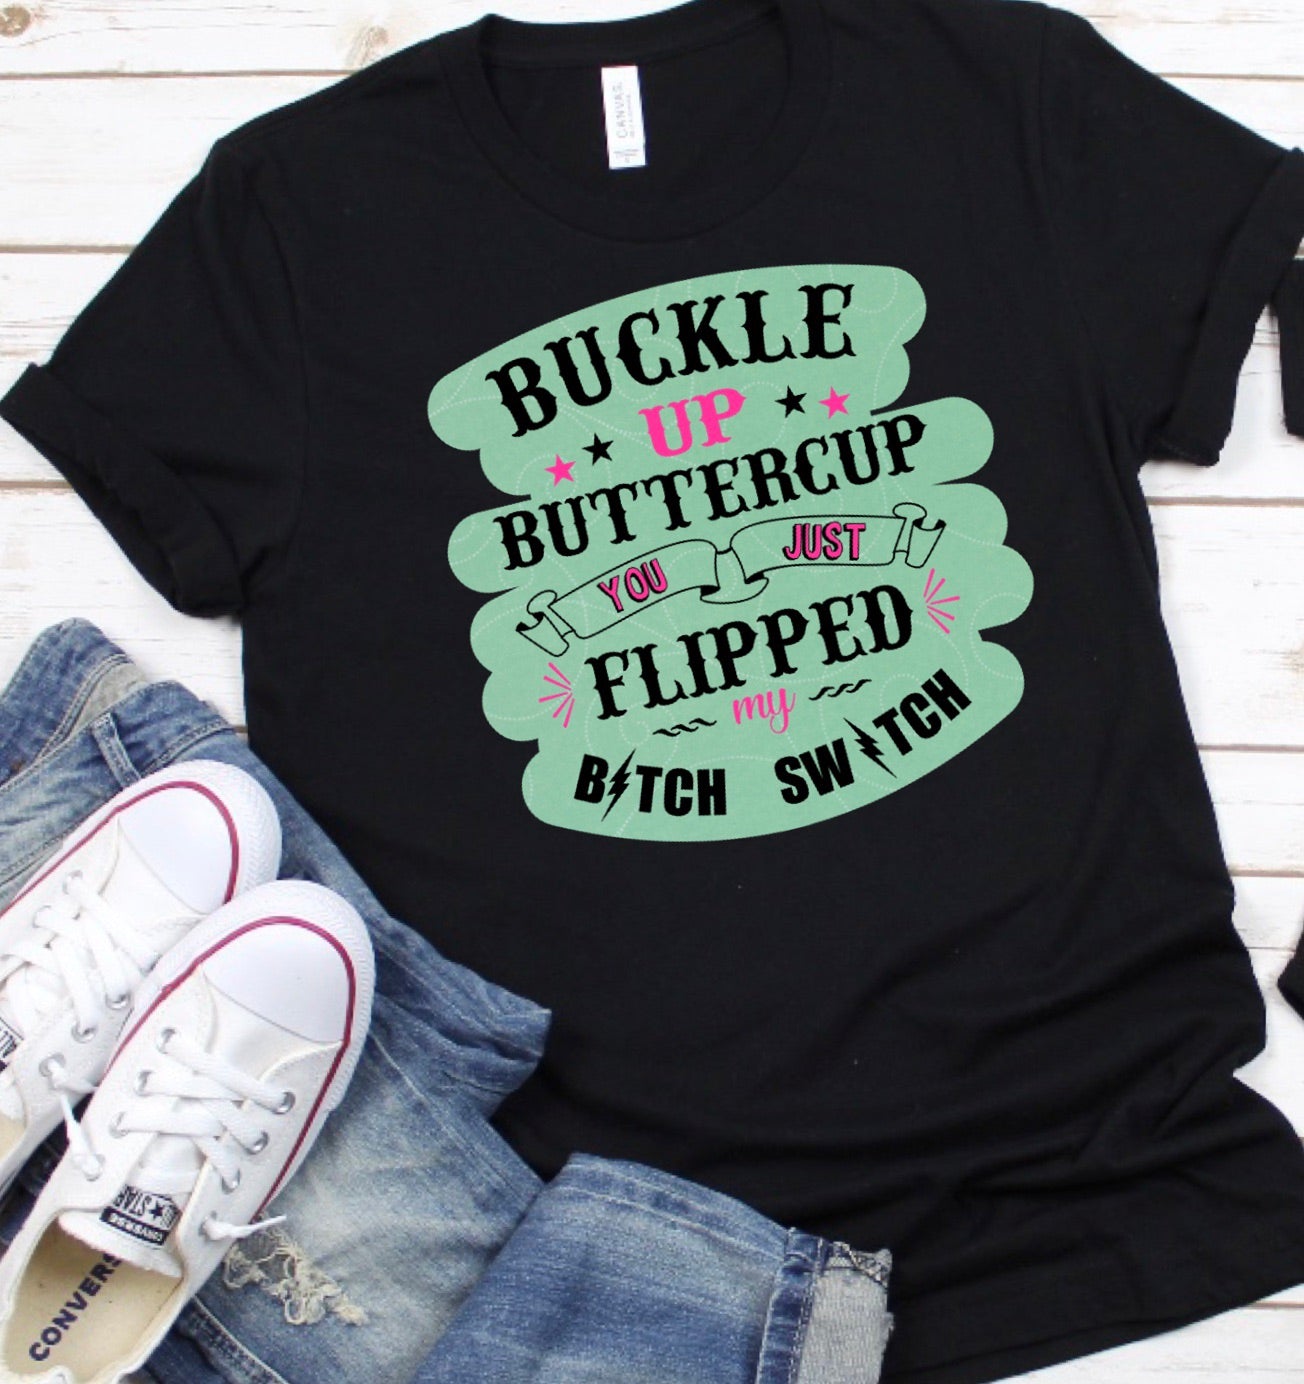 Buckle up buttercup you just flipped my bitch switch DTF TRANSFERPRINT TO ORDER